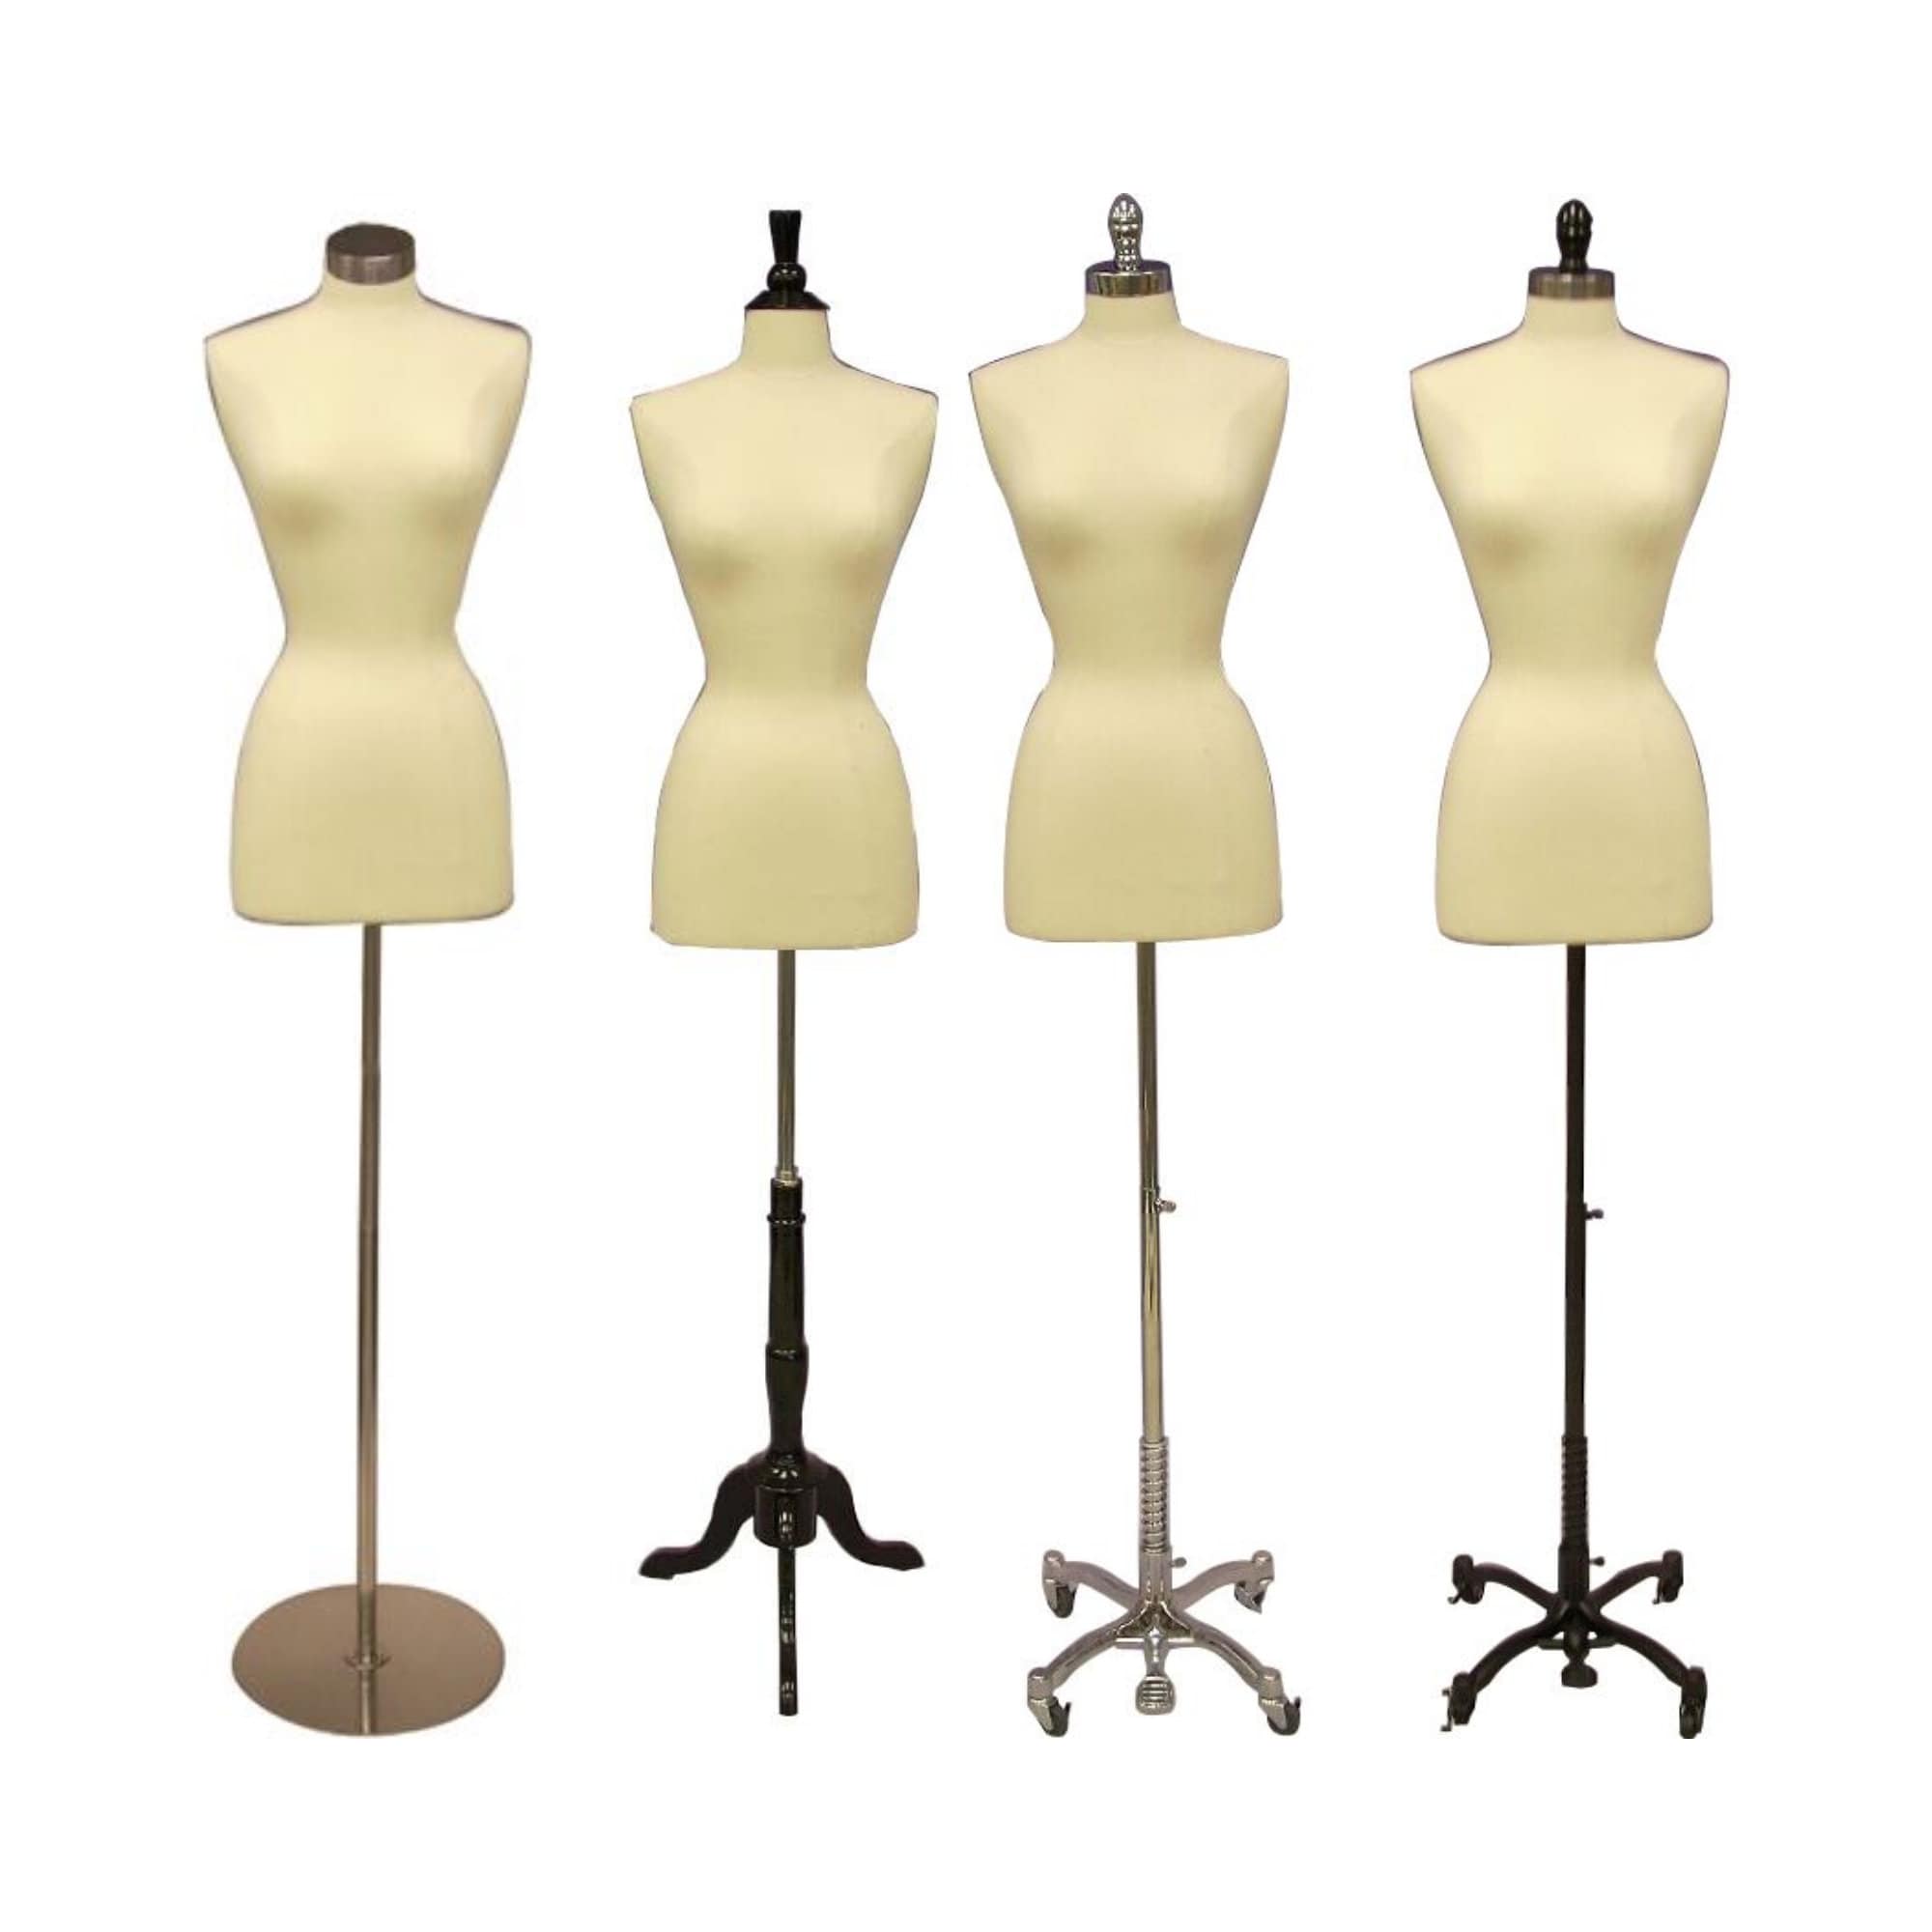 Female Dress Form Pinnable Foam Mannequin Torso Size 2-4 with Square Metal Base 